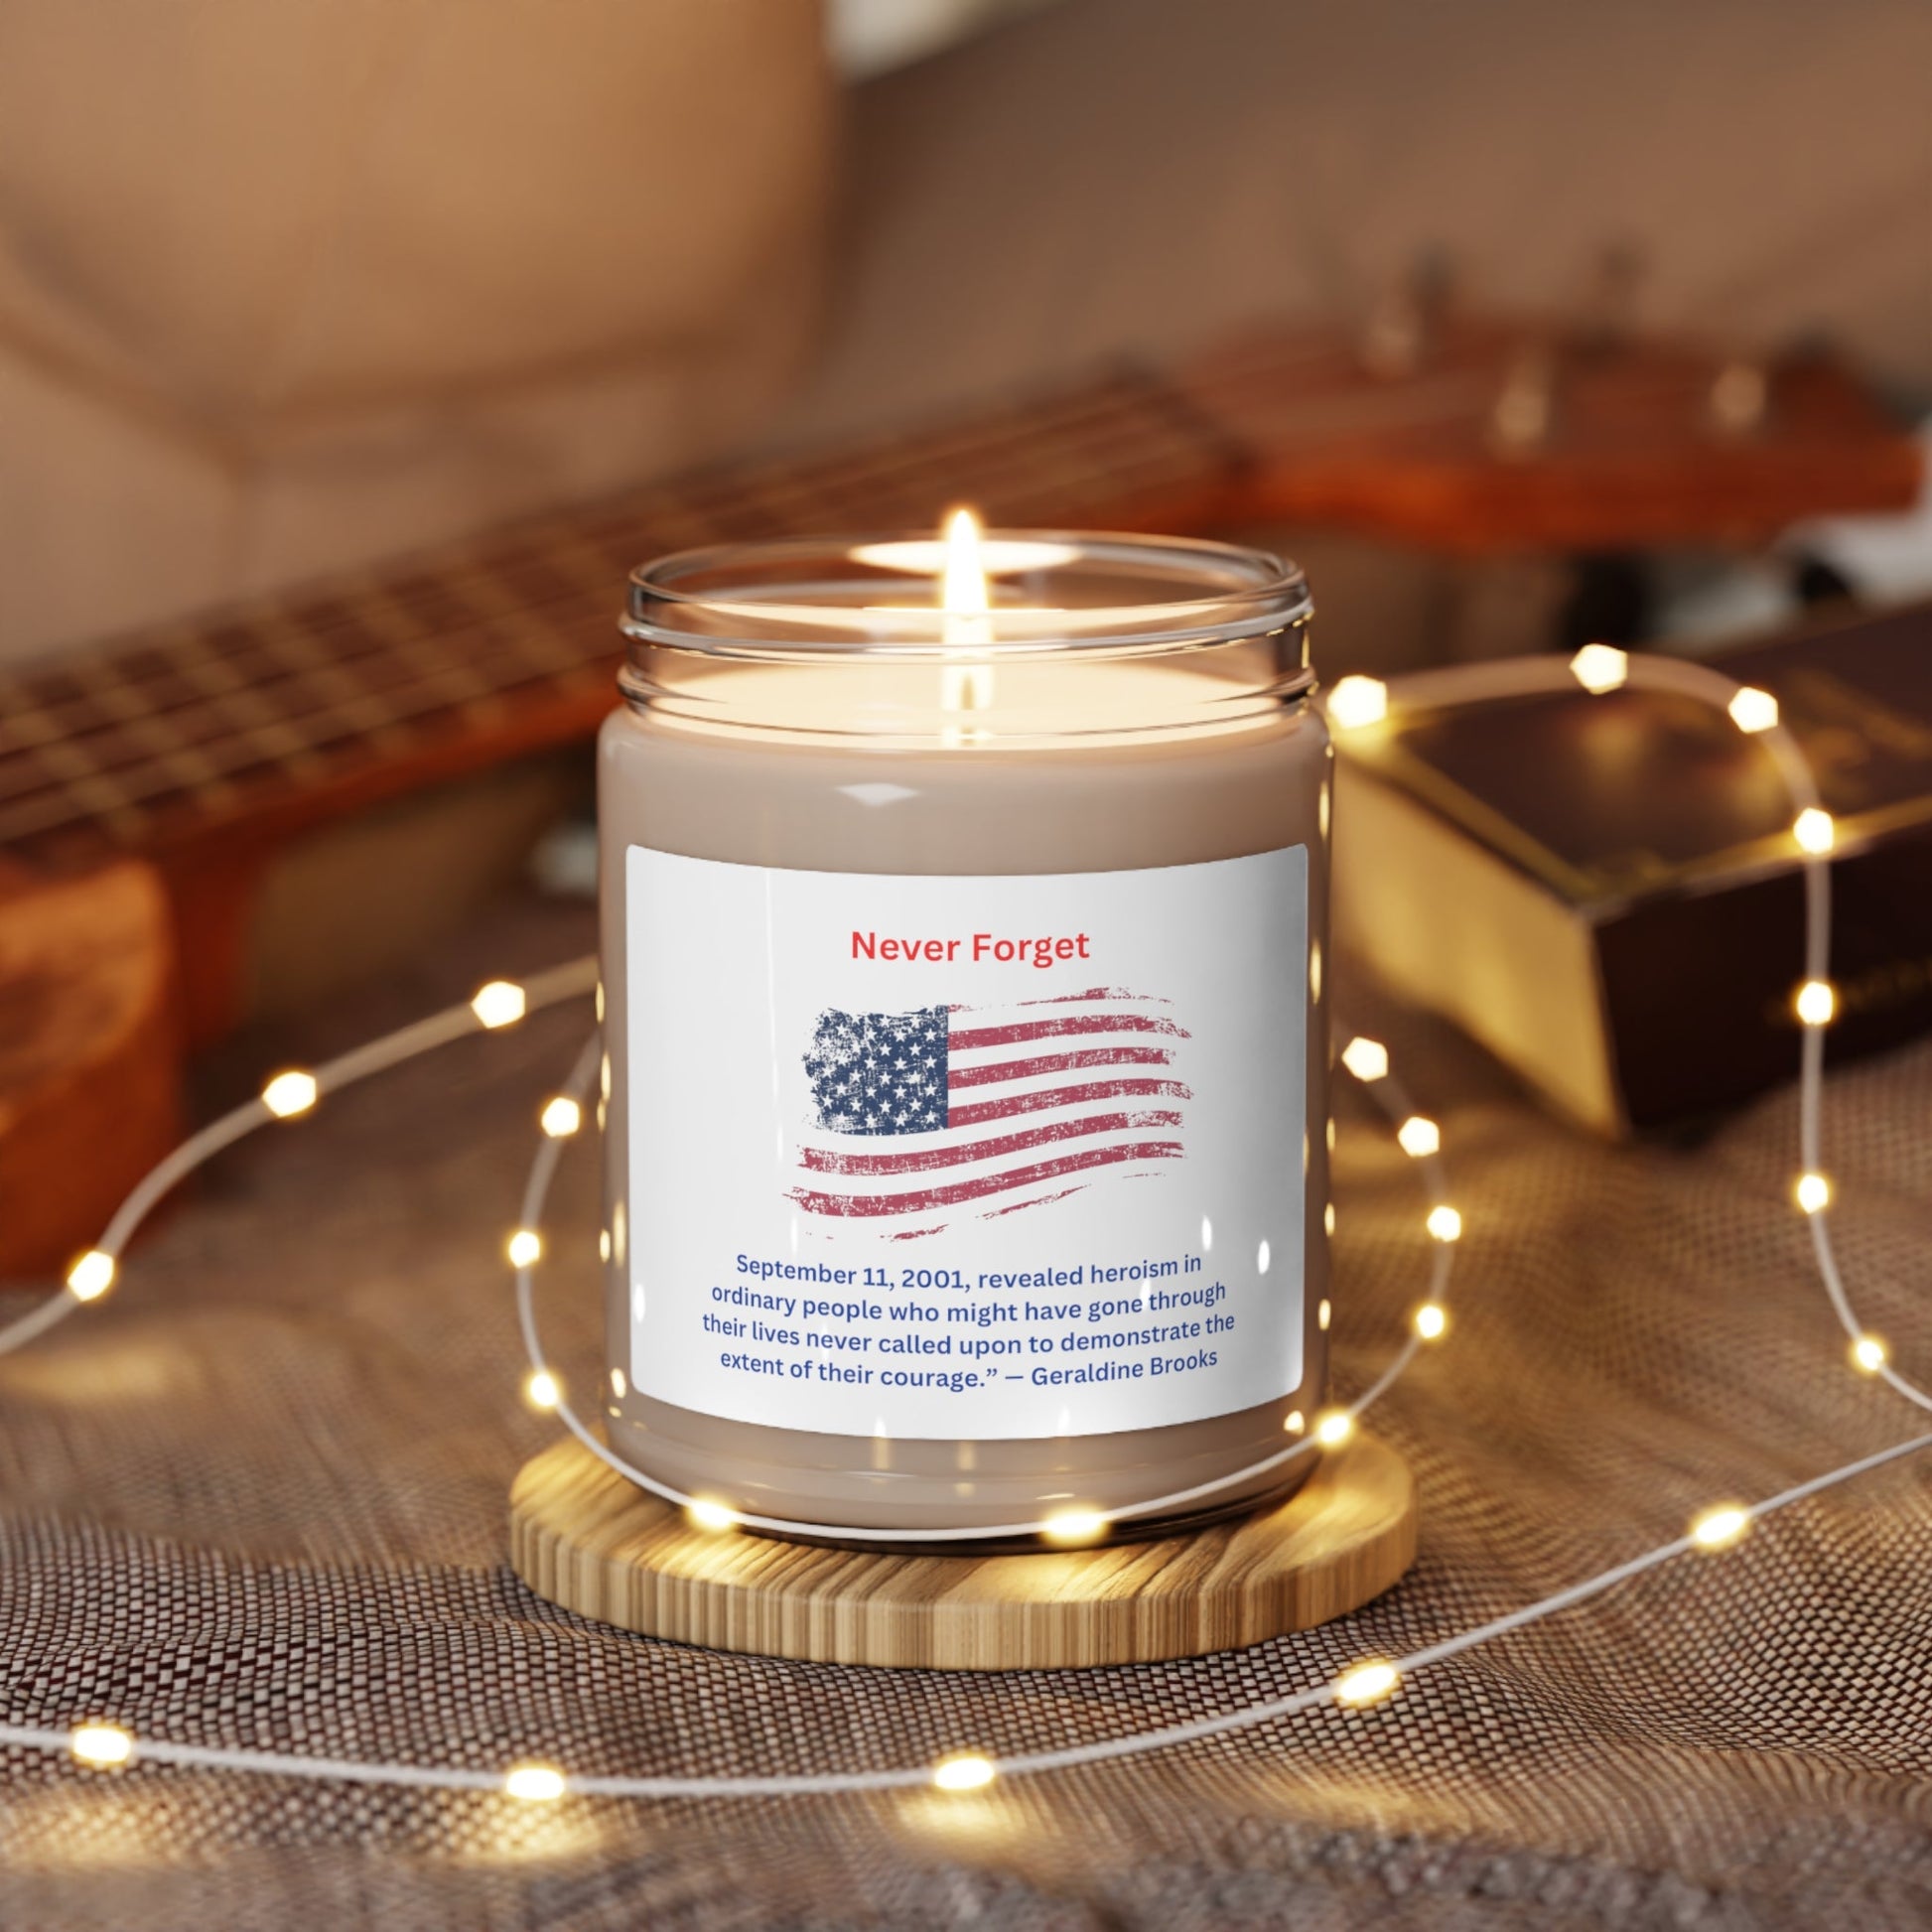 Get trendy with Apple Harvest Scented Soy Candle, 9oz  In remembrance of September 11 - Home Decor available at Good Gift Company. Grab yours for $16 today!